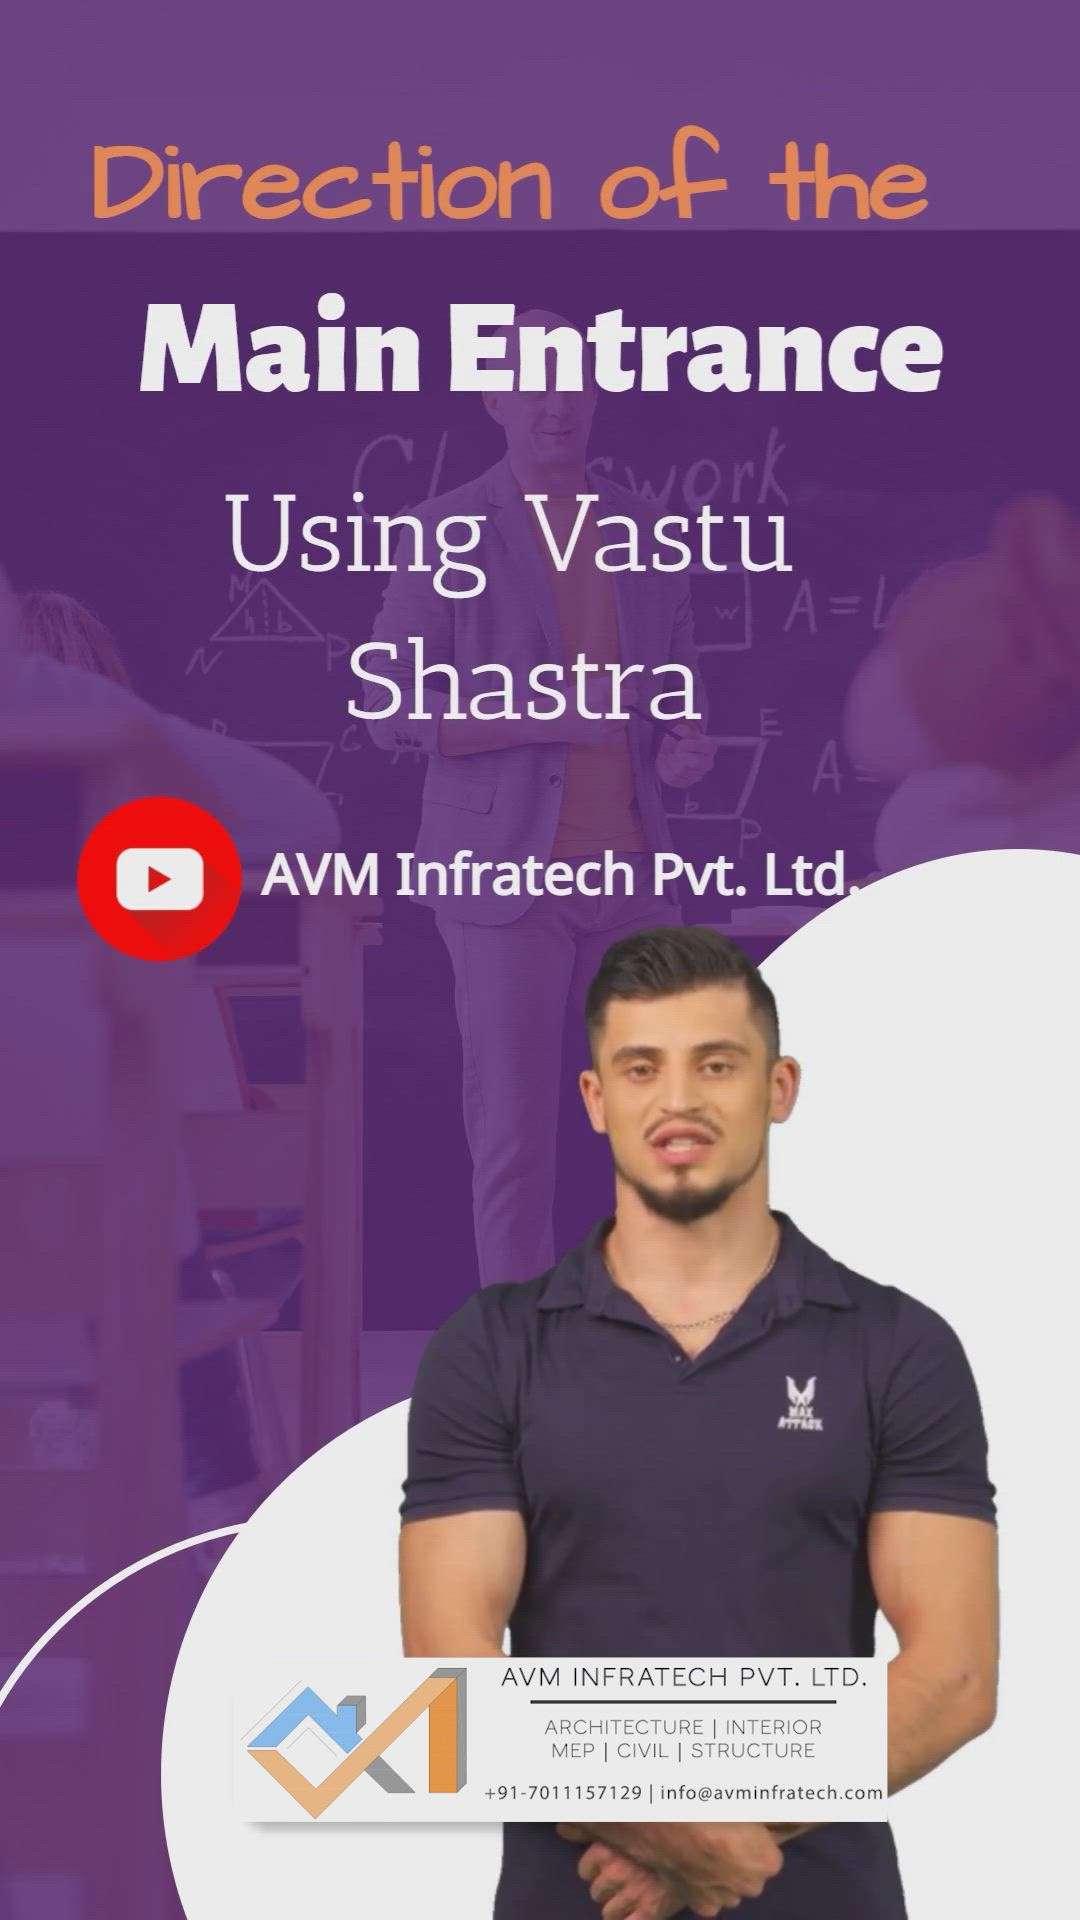 Let's find out the direction of the Main Entrance of your house using Vastu Shastra.
Link: https://youtu.be/K6zz1tr6f-E